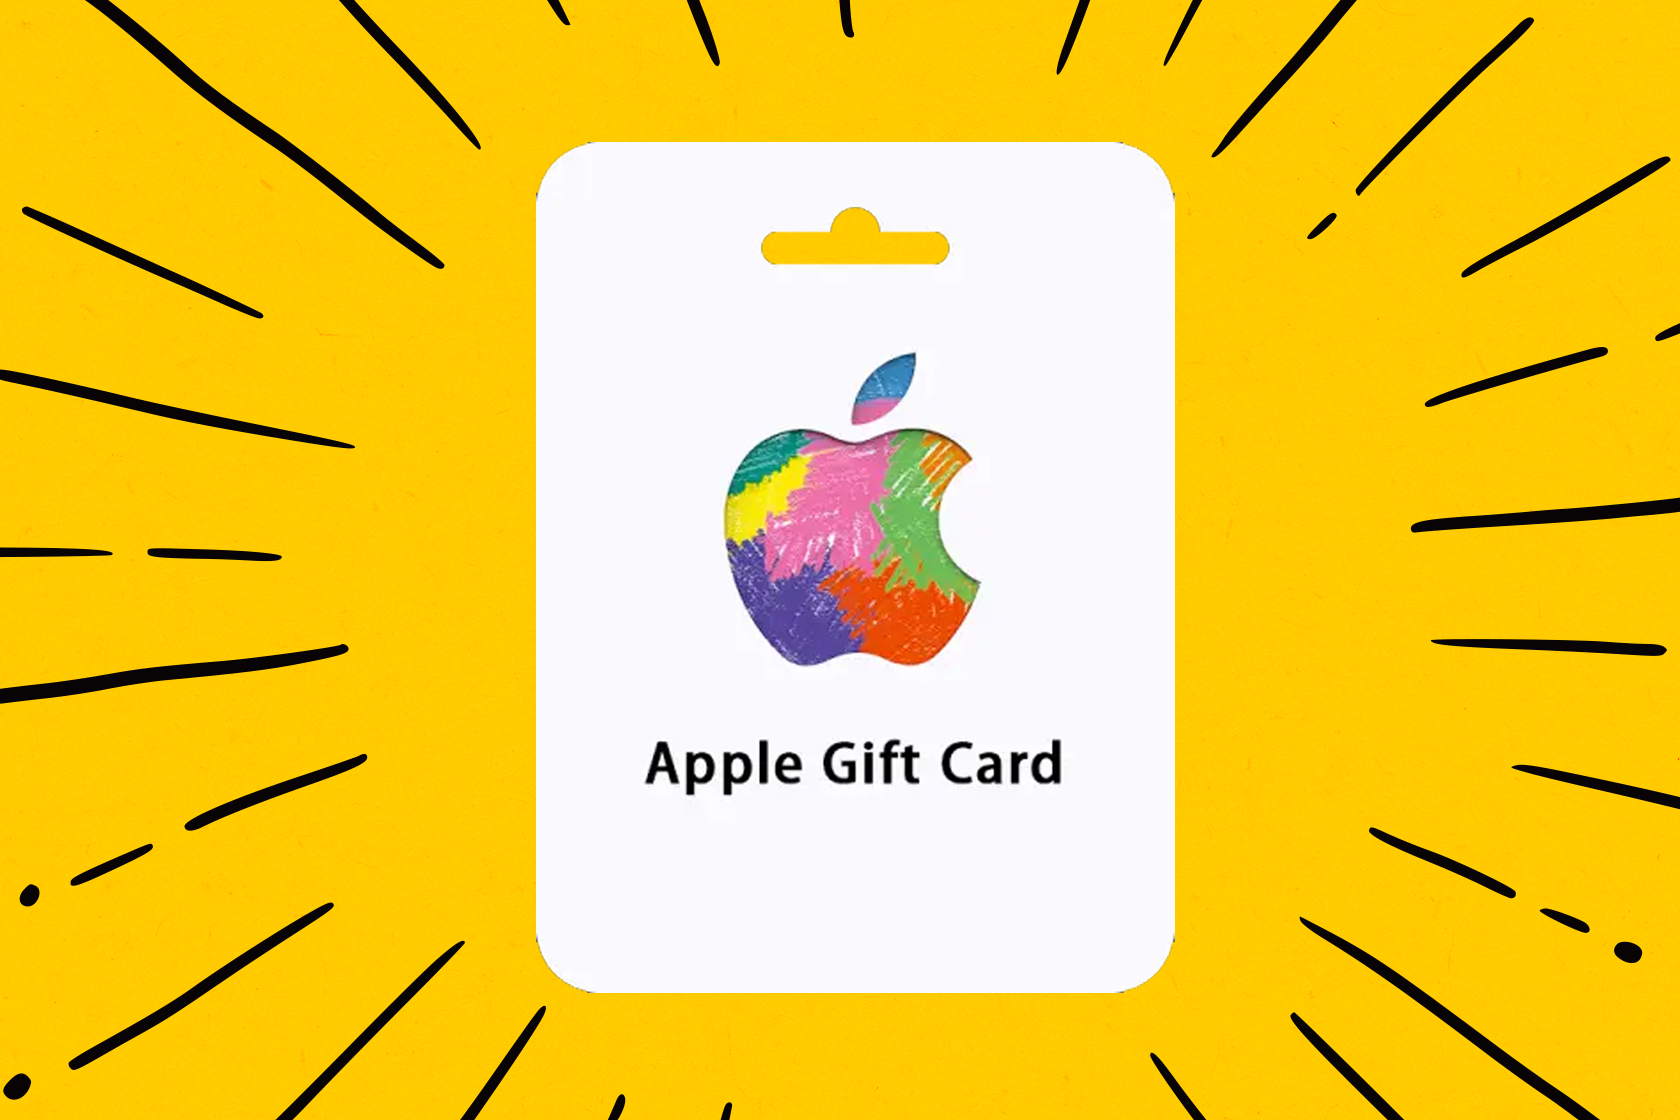 Apple agrees to pay $1.8 million to settle gift card class action